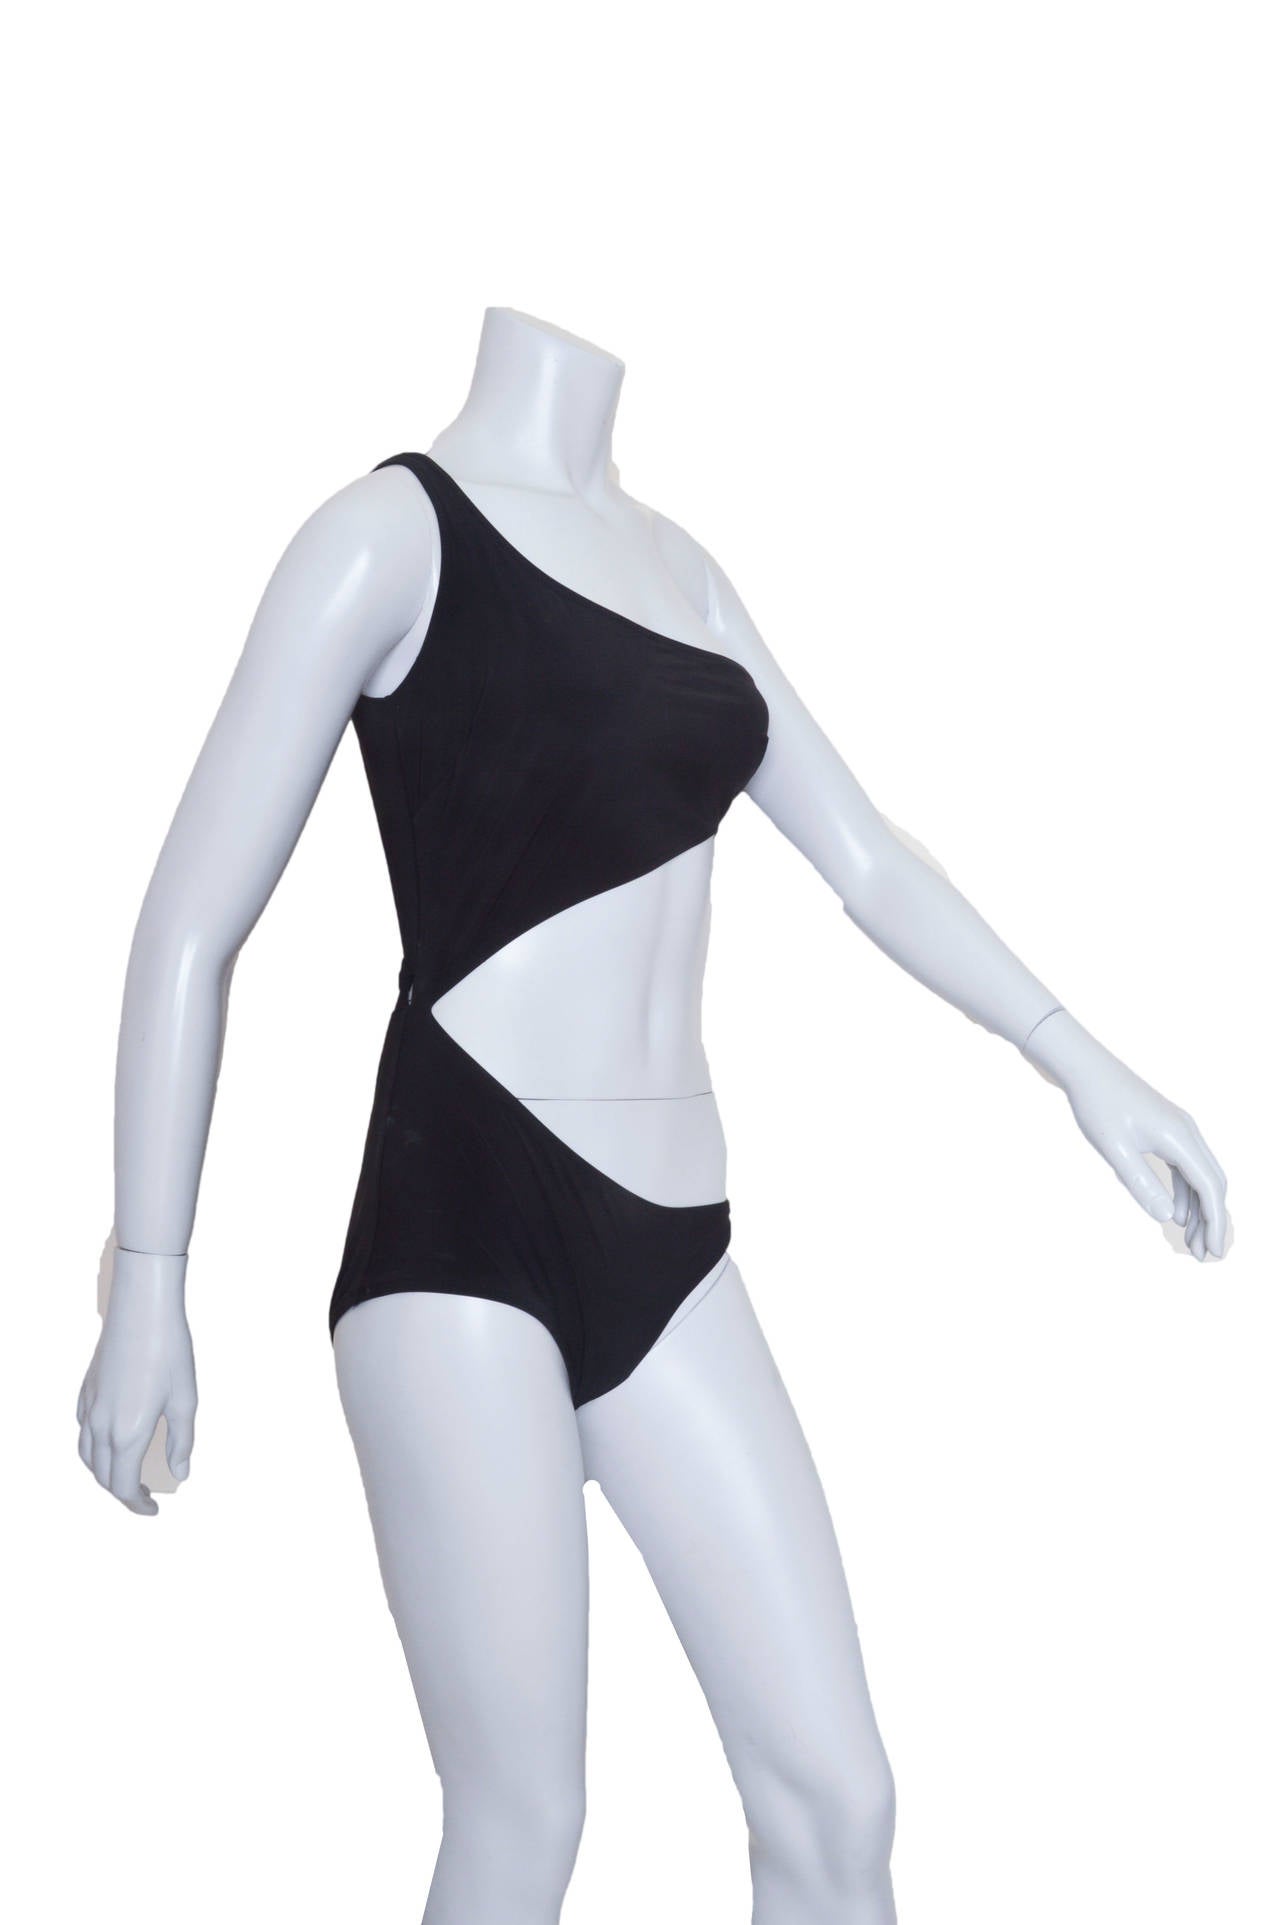 Insanely sexy Gucci 2011 swim suit.
Black one-shoulder swimsuit with cutout waist. 
Single shoulder strap, bandeau top with side boning
which joins the briefs at one side.
Fully lined.
Tagged a size Small.